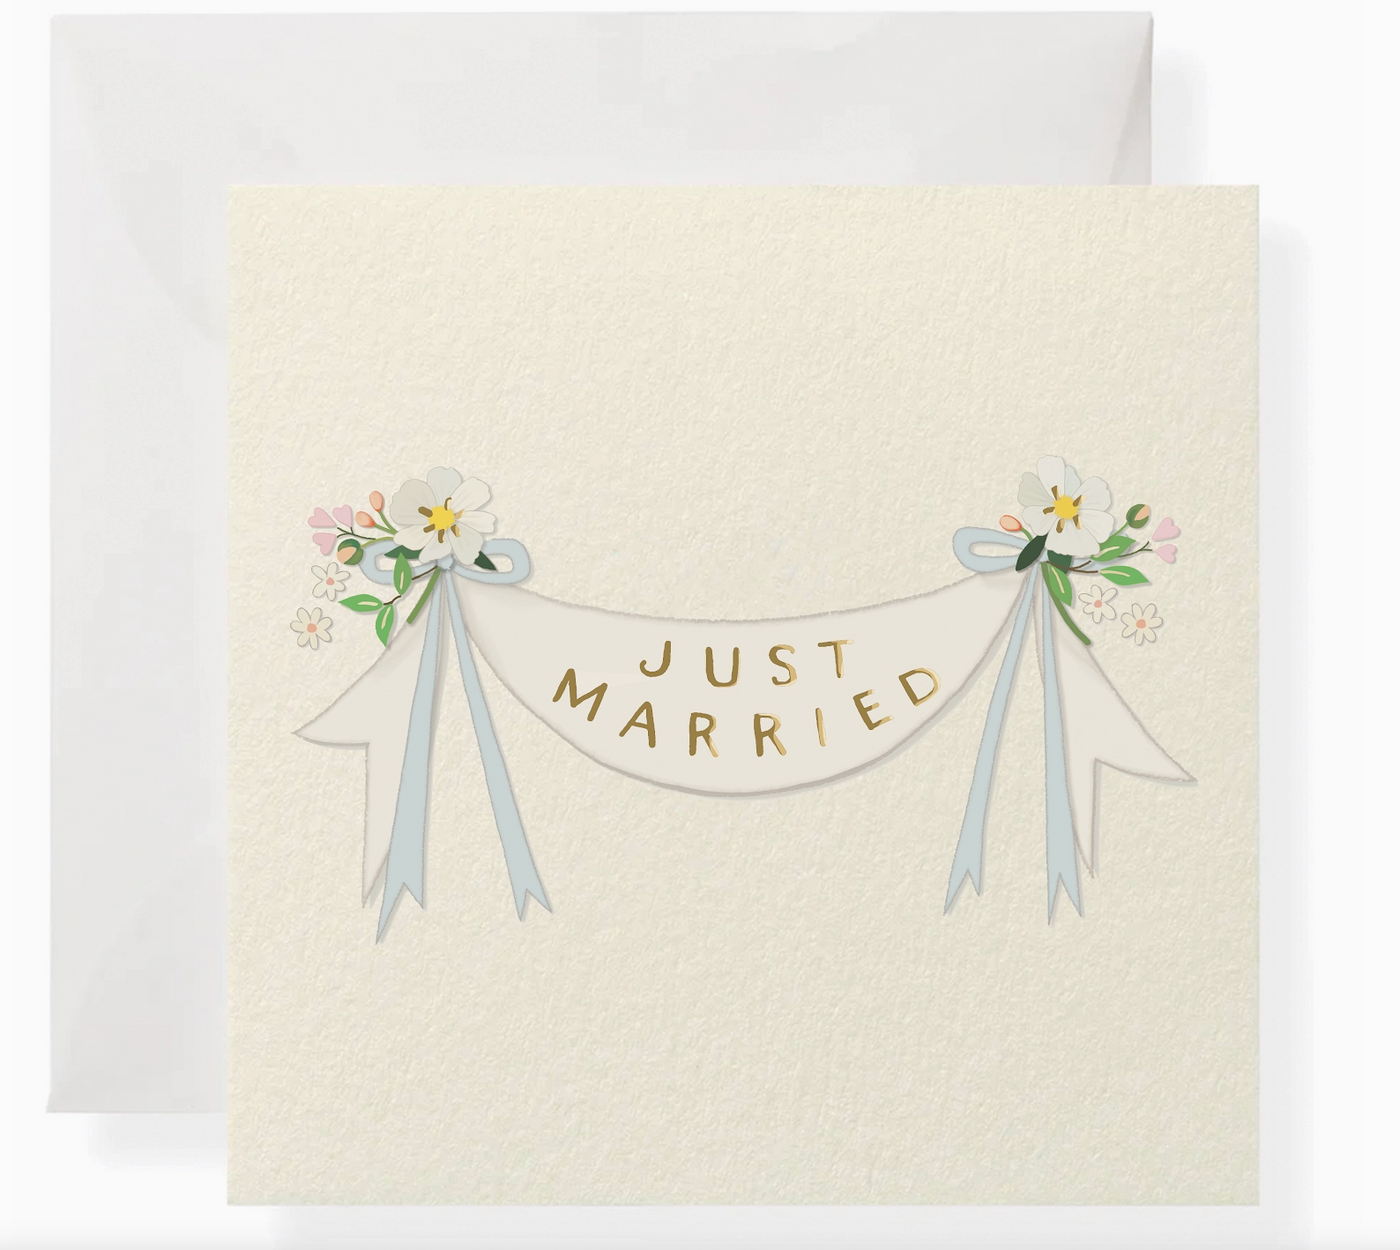 GREETING MINI CARD "JUST MARRIED"